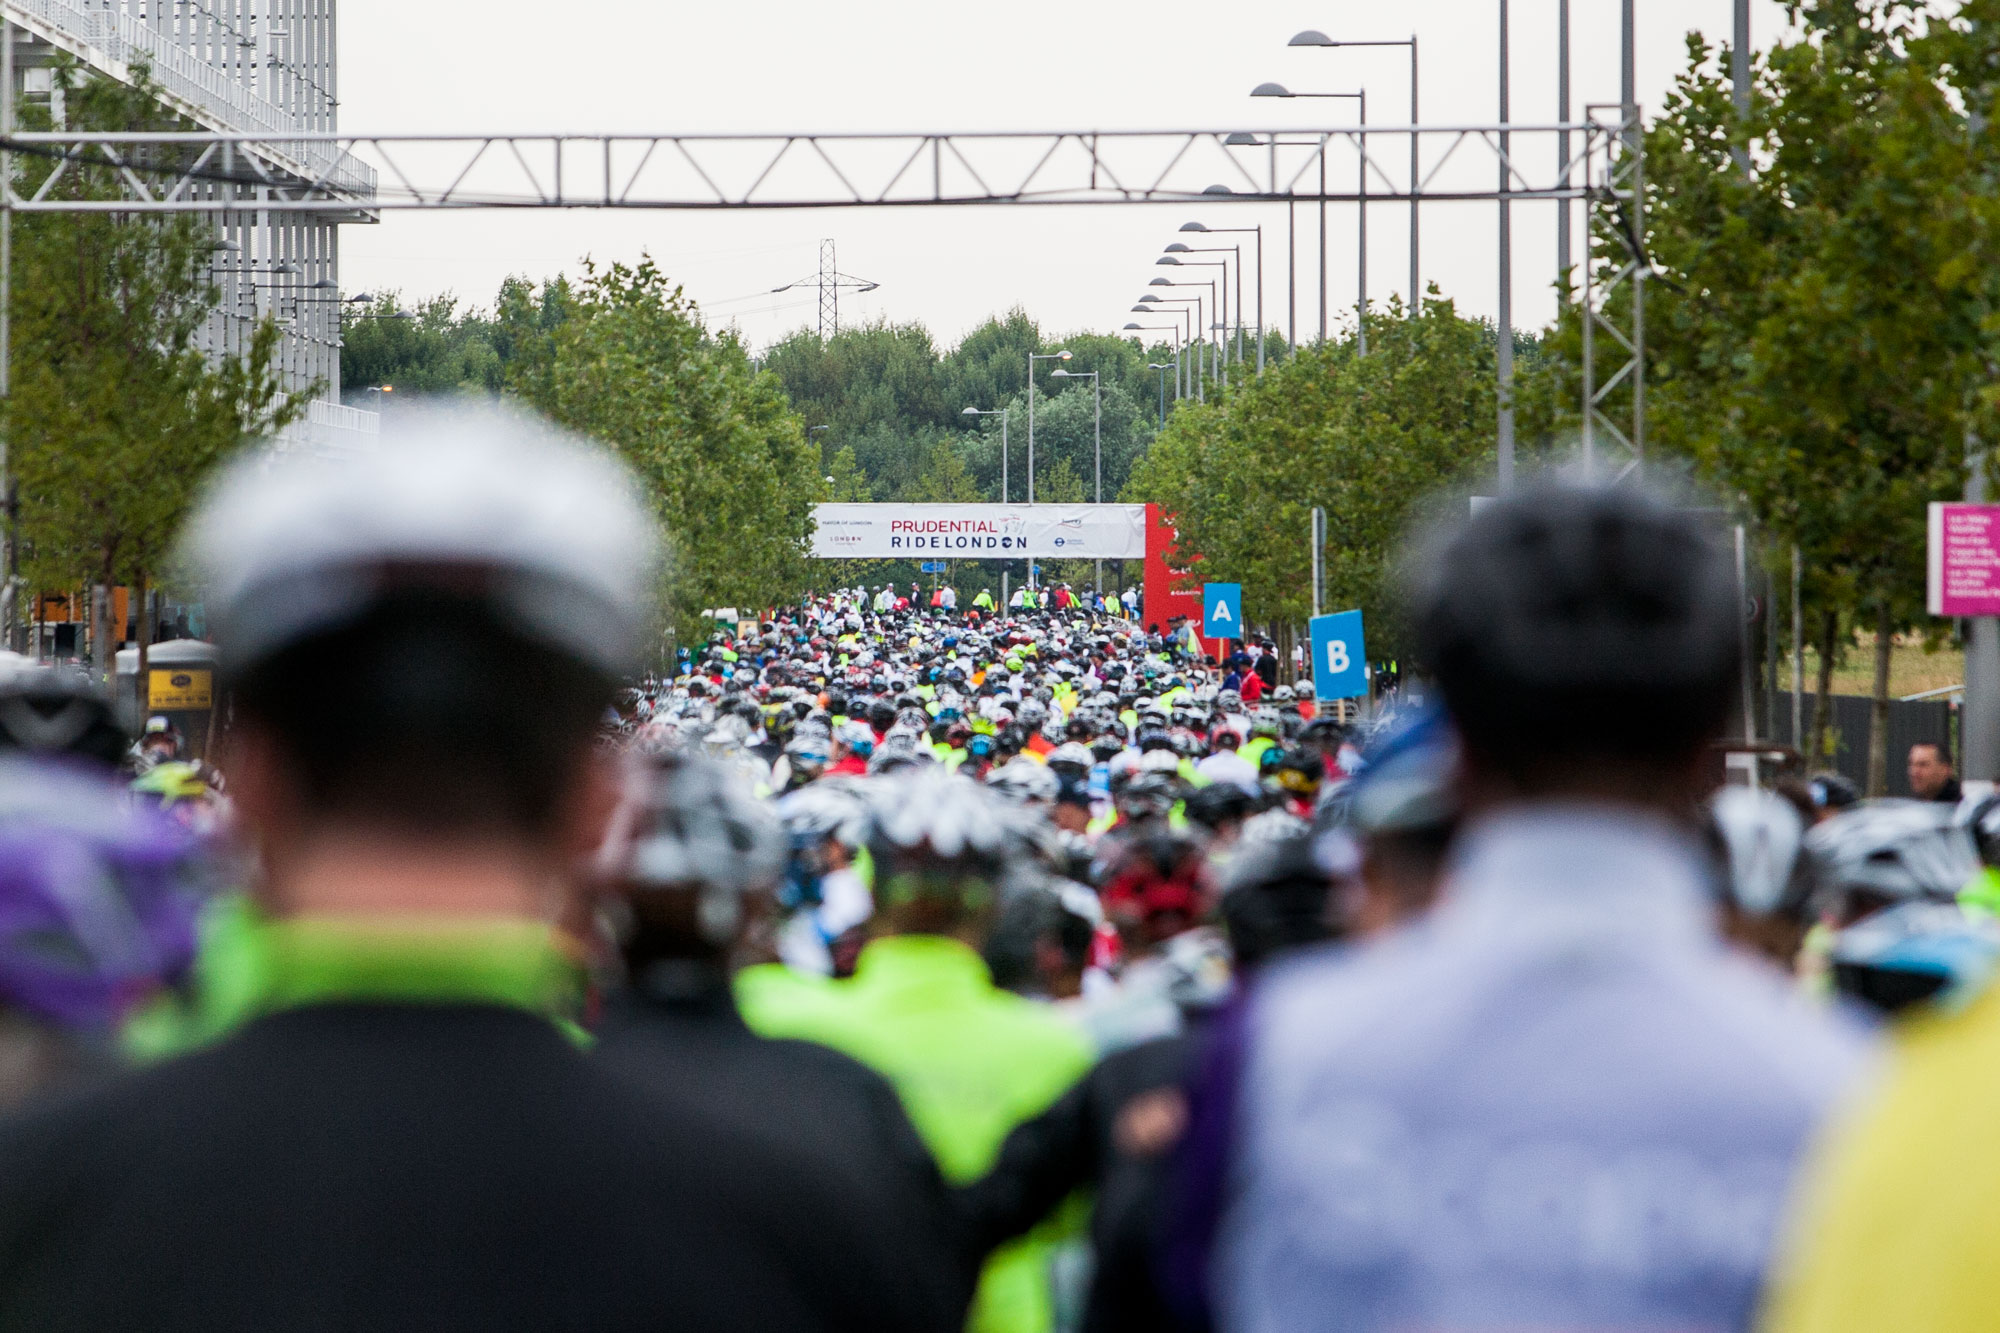 Looking over the heads of a sea of cyclists at RideLondon 2014